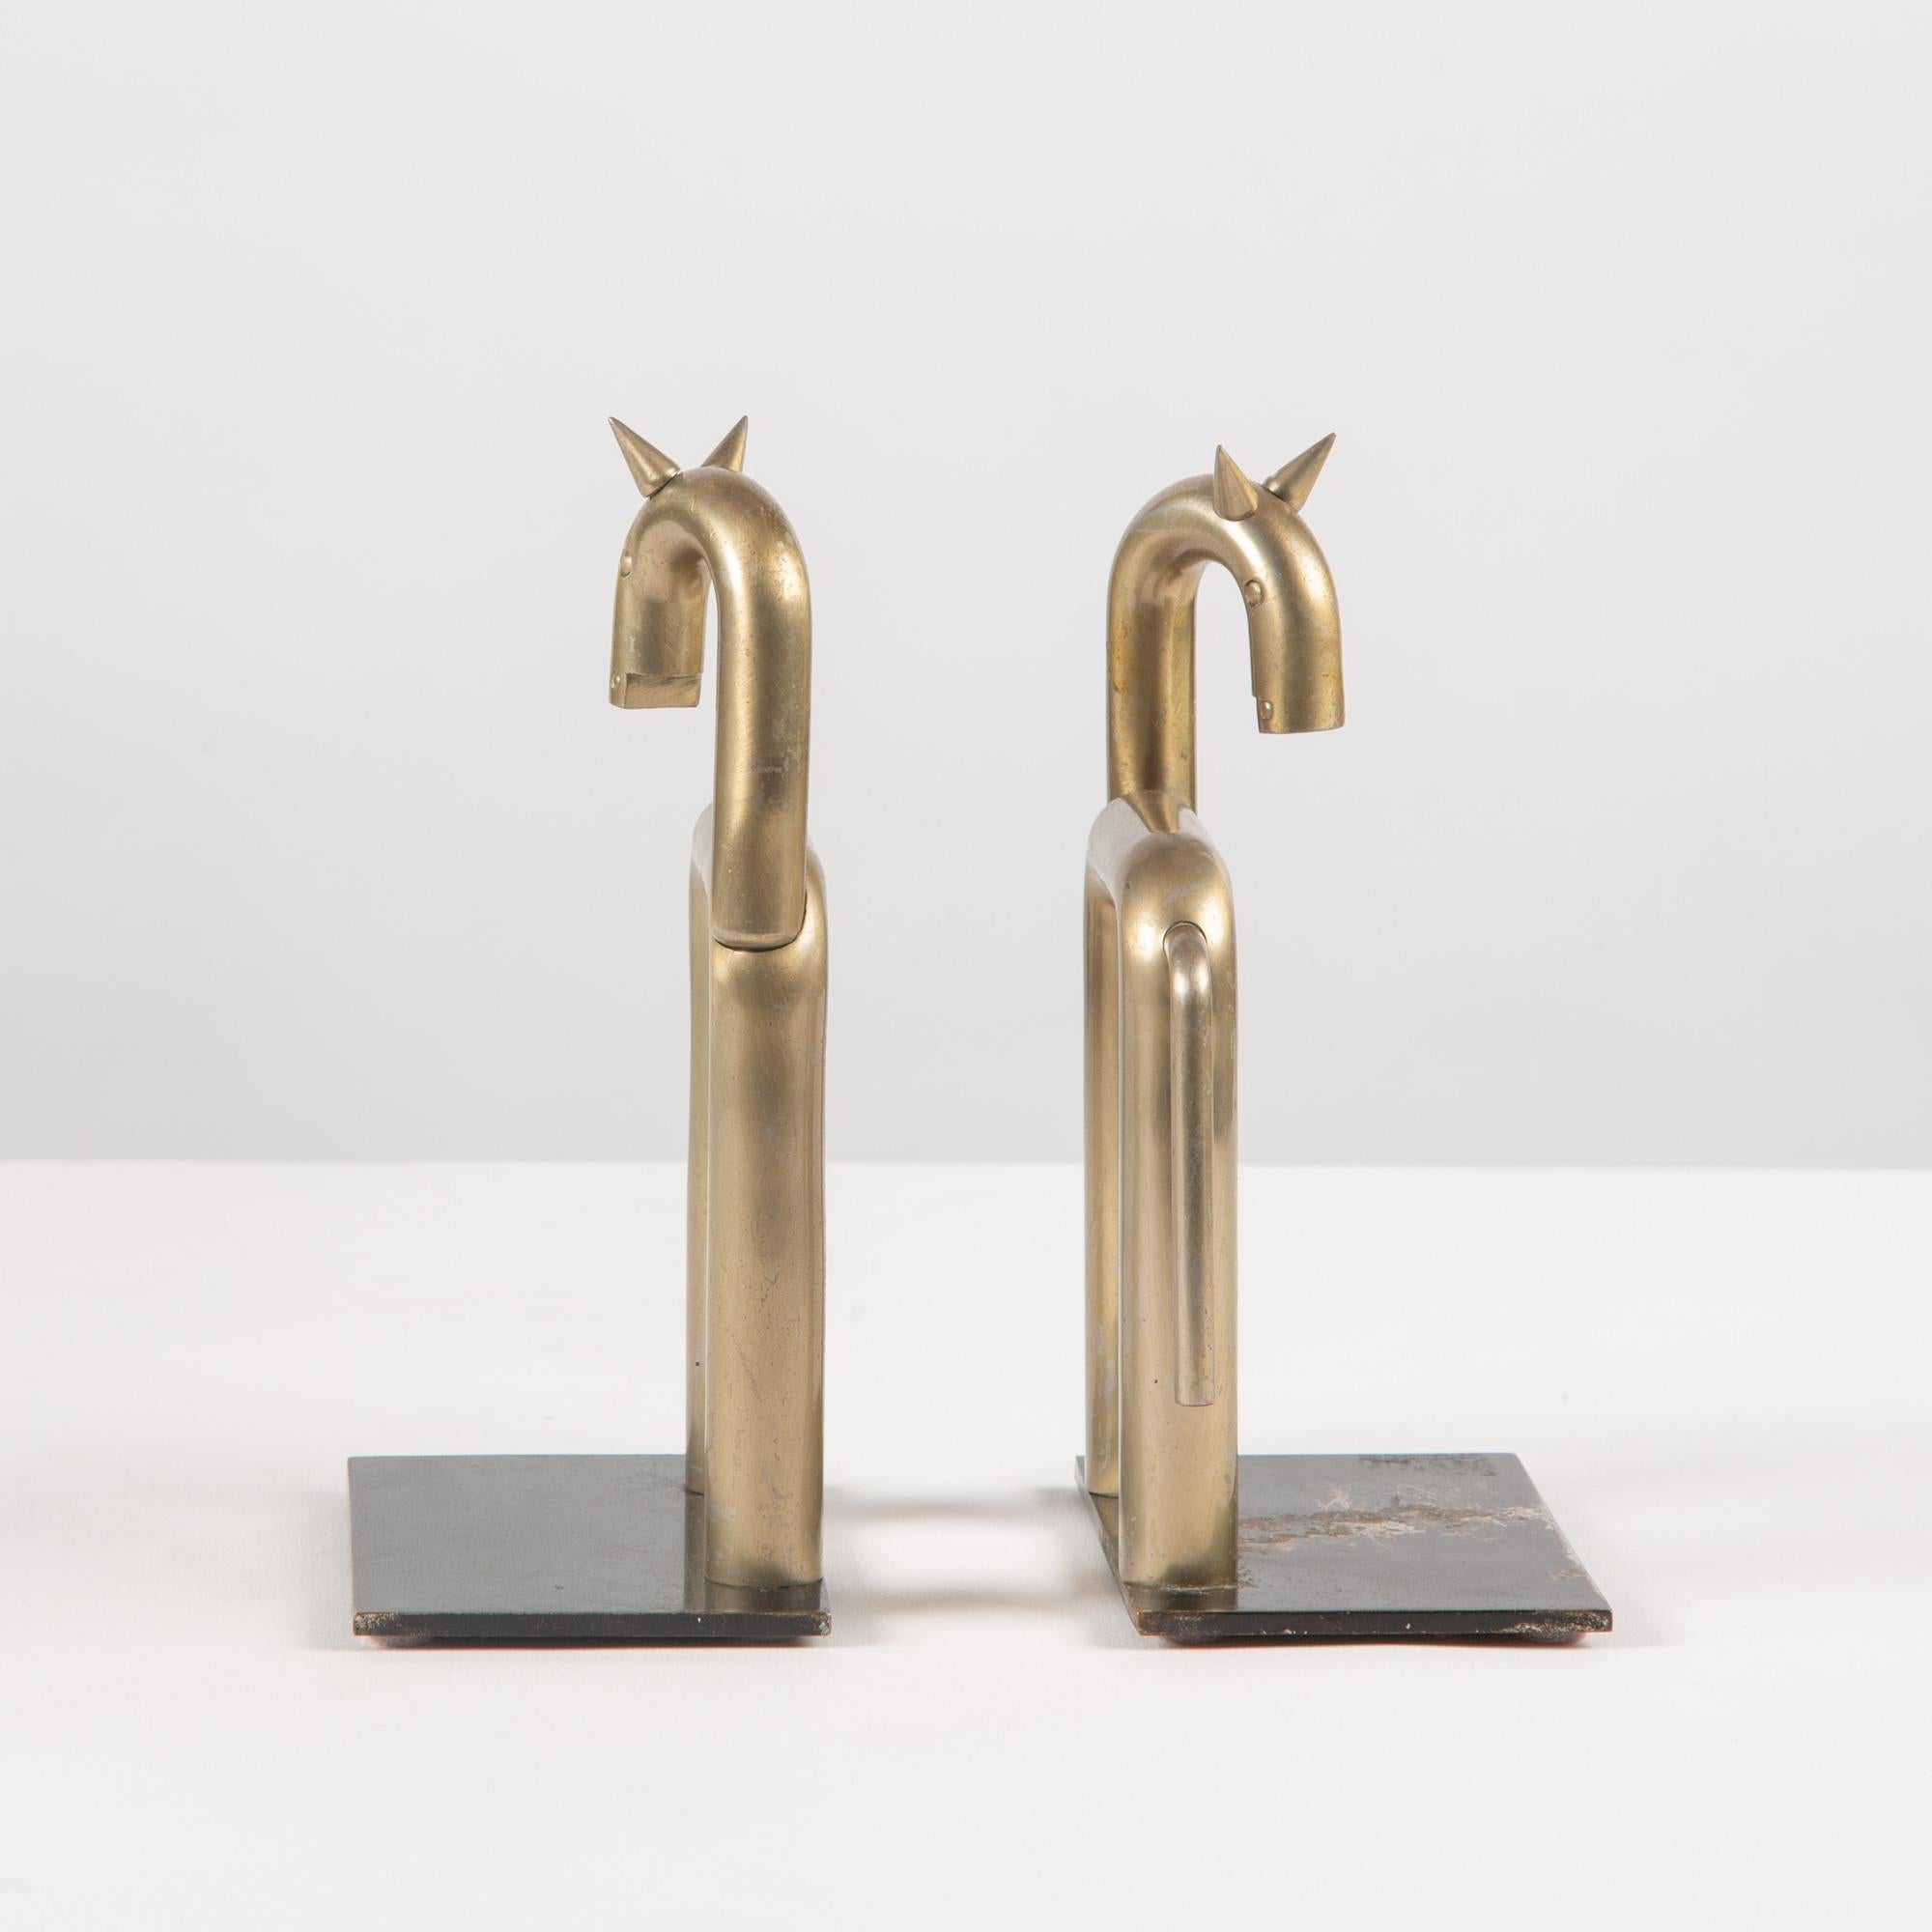 American Pair of Stainless Steel Horse Bookends by Walter von Nessen for Chase USA